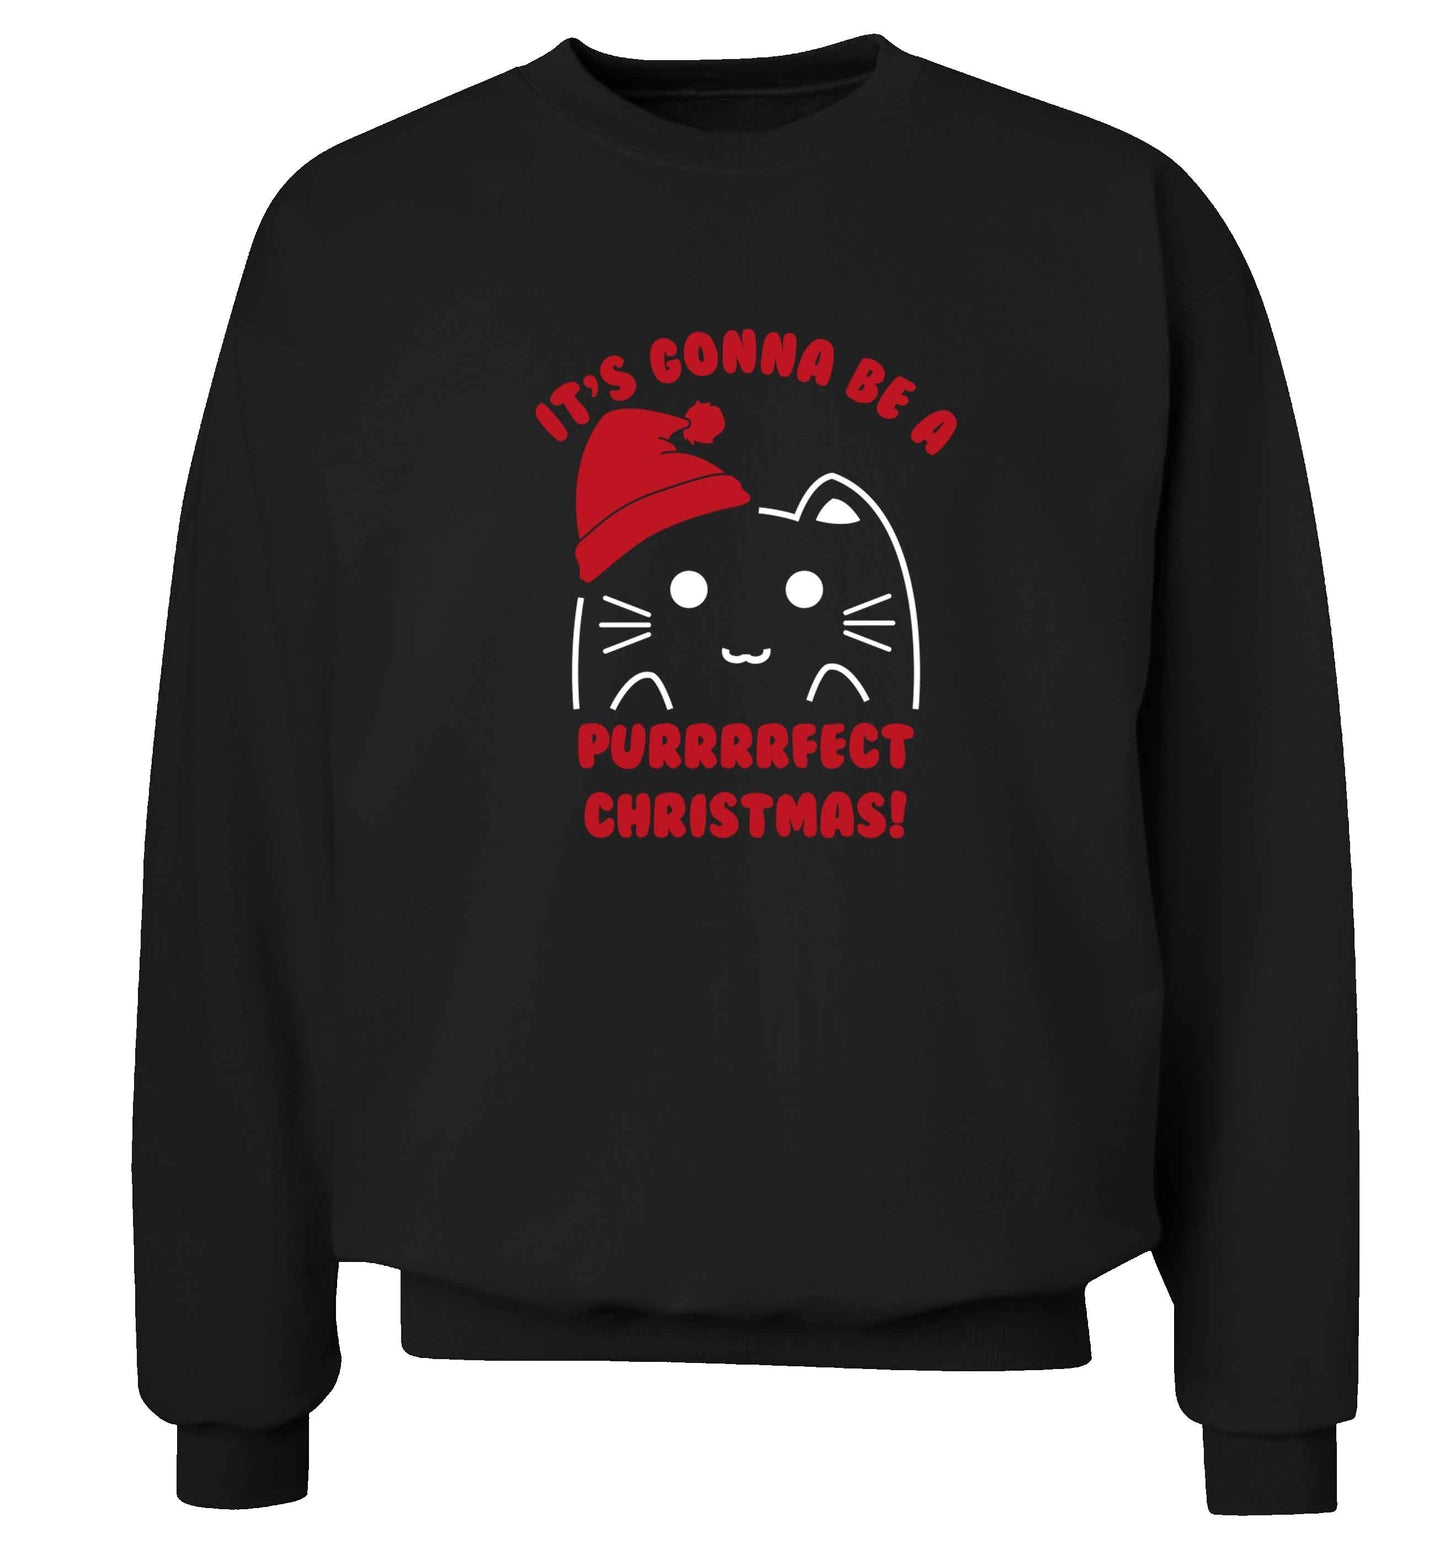 It's going to be a purrfect Christmas adult's unisex black sweater 2XL